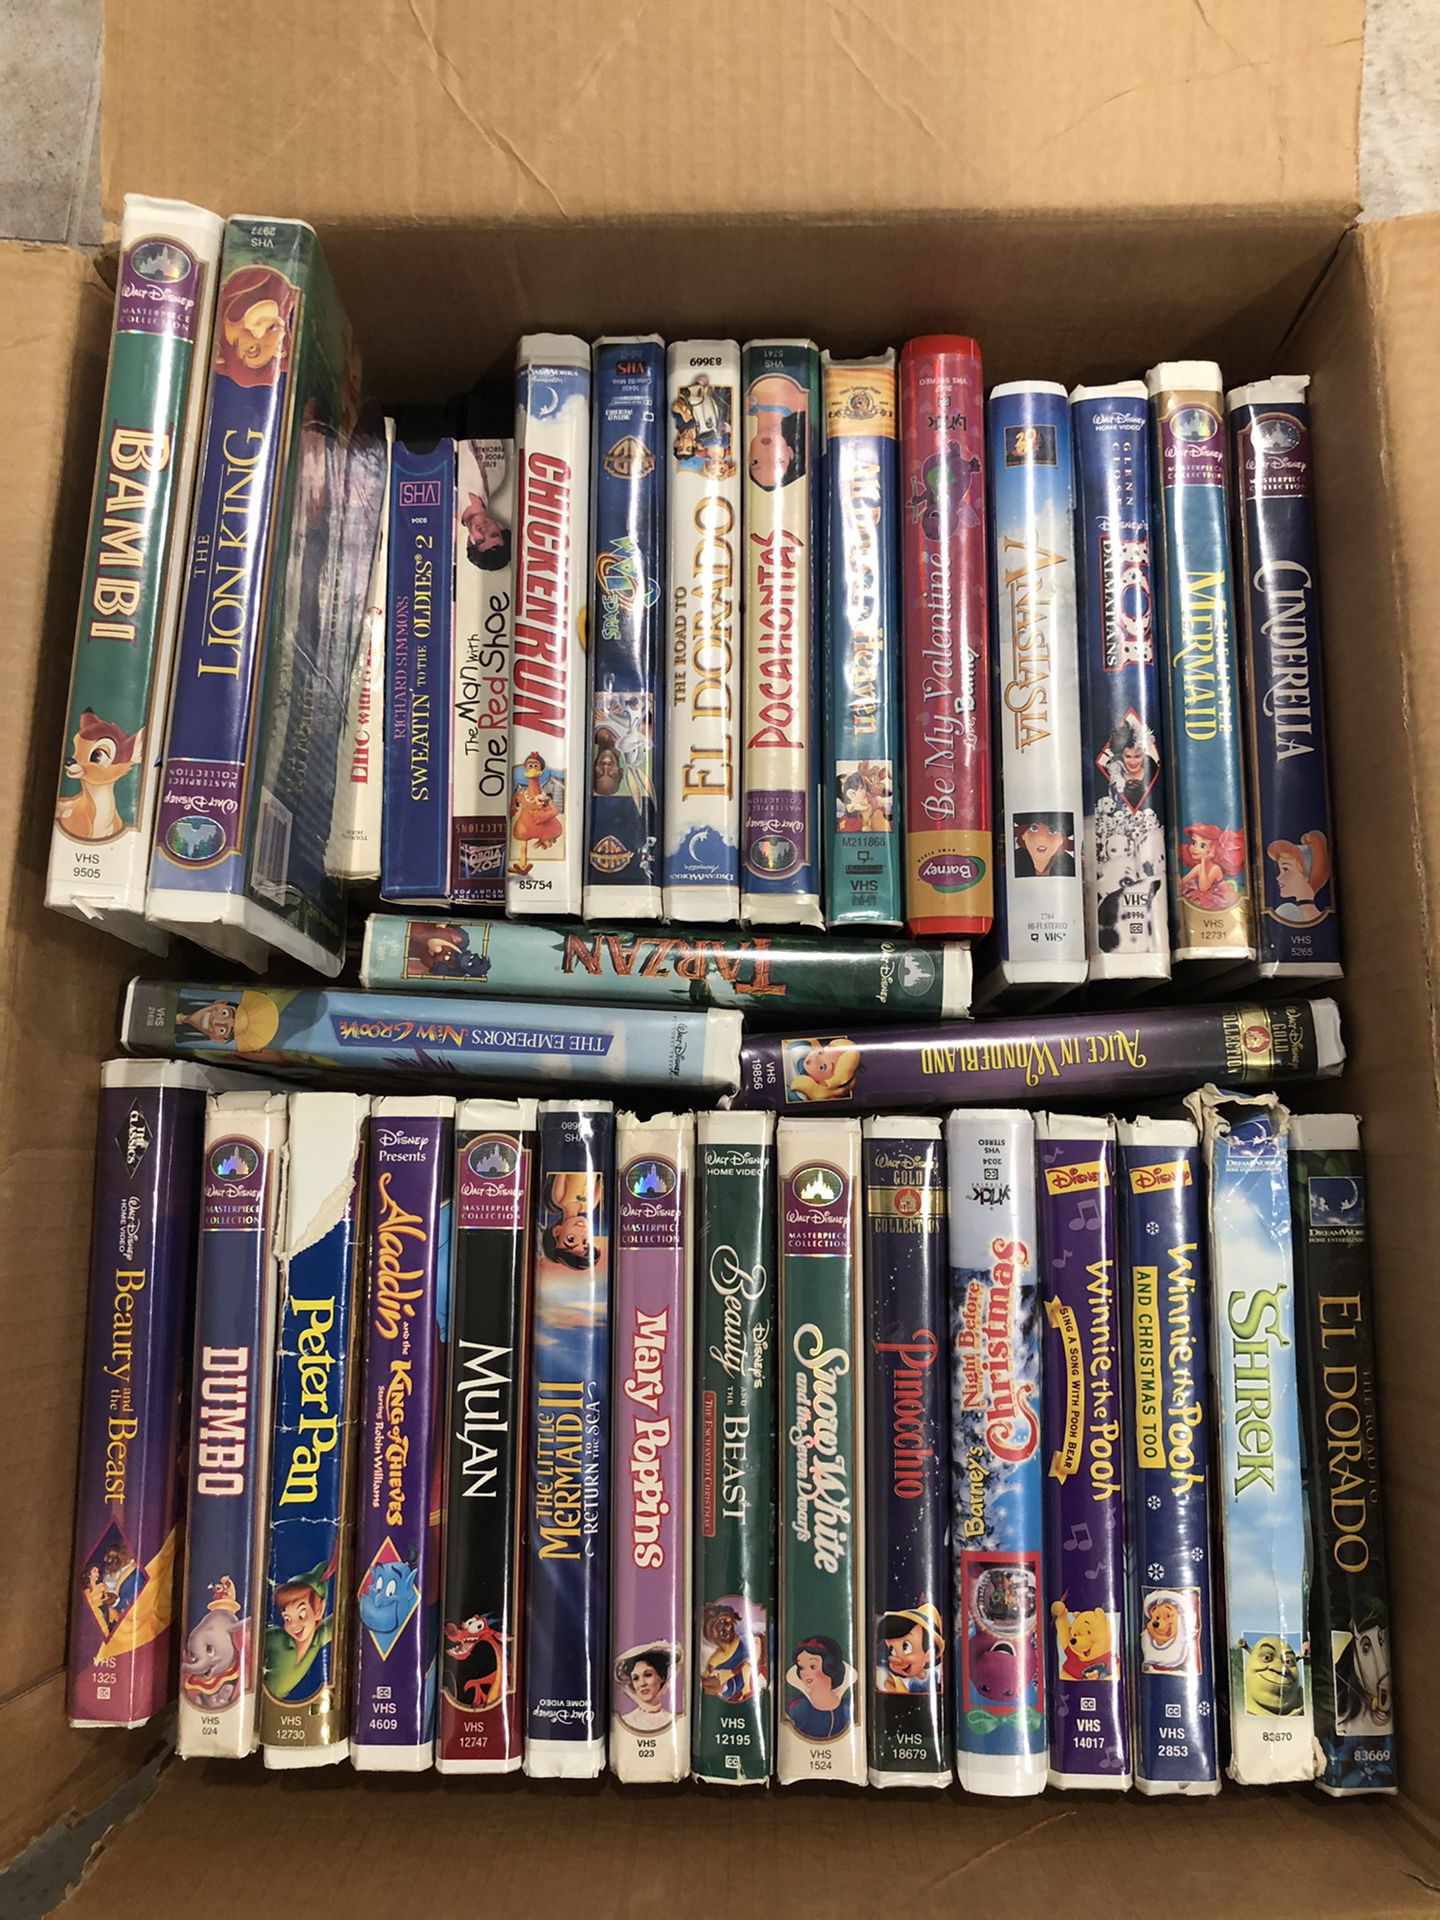 Disney movies plus another 80 to 100